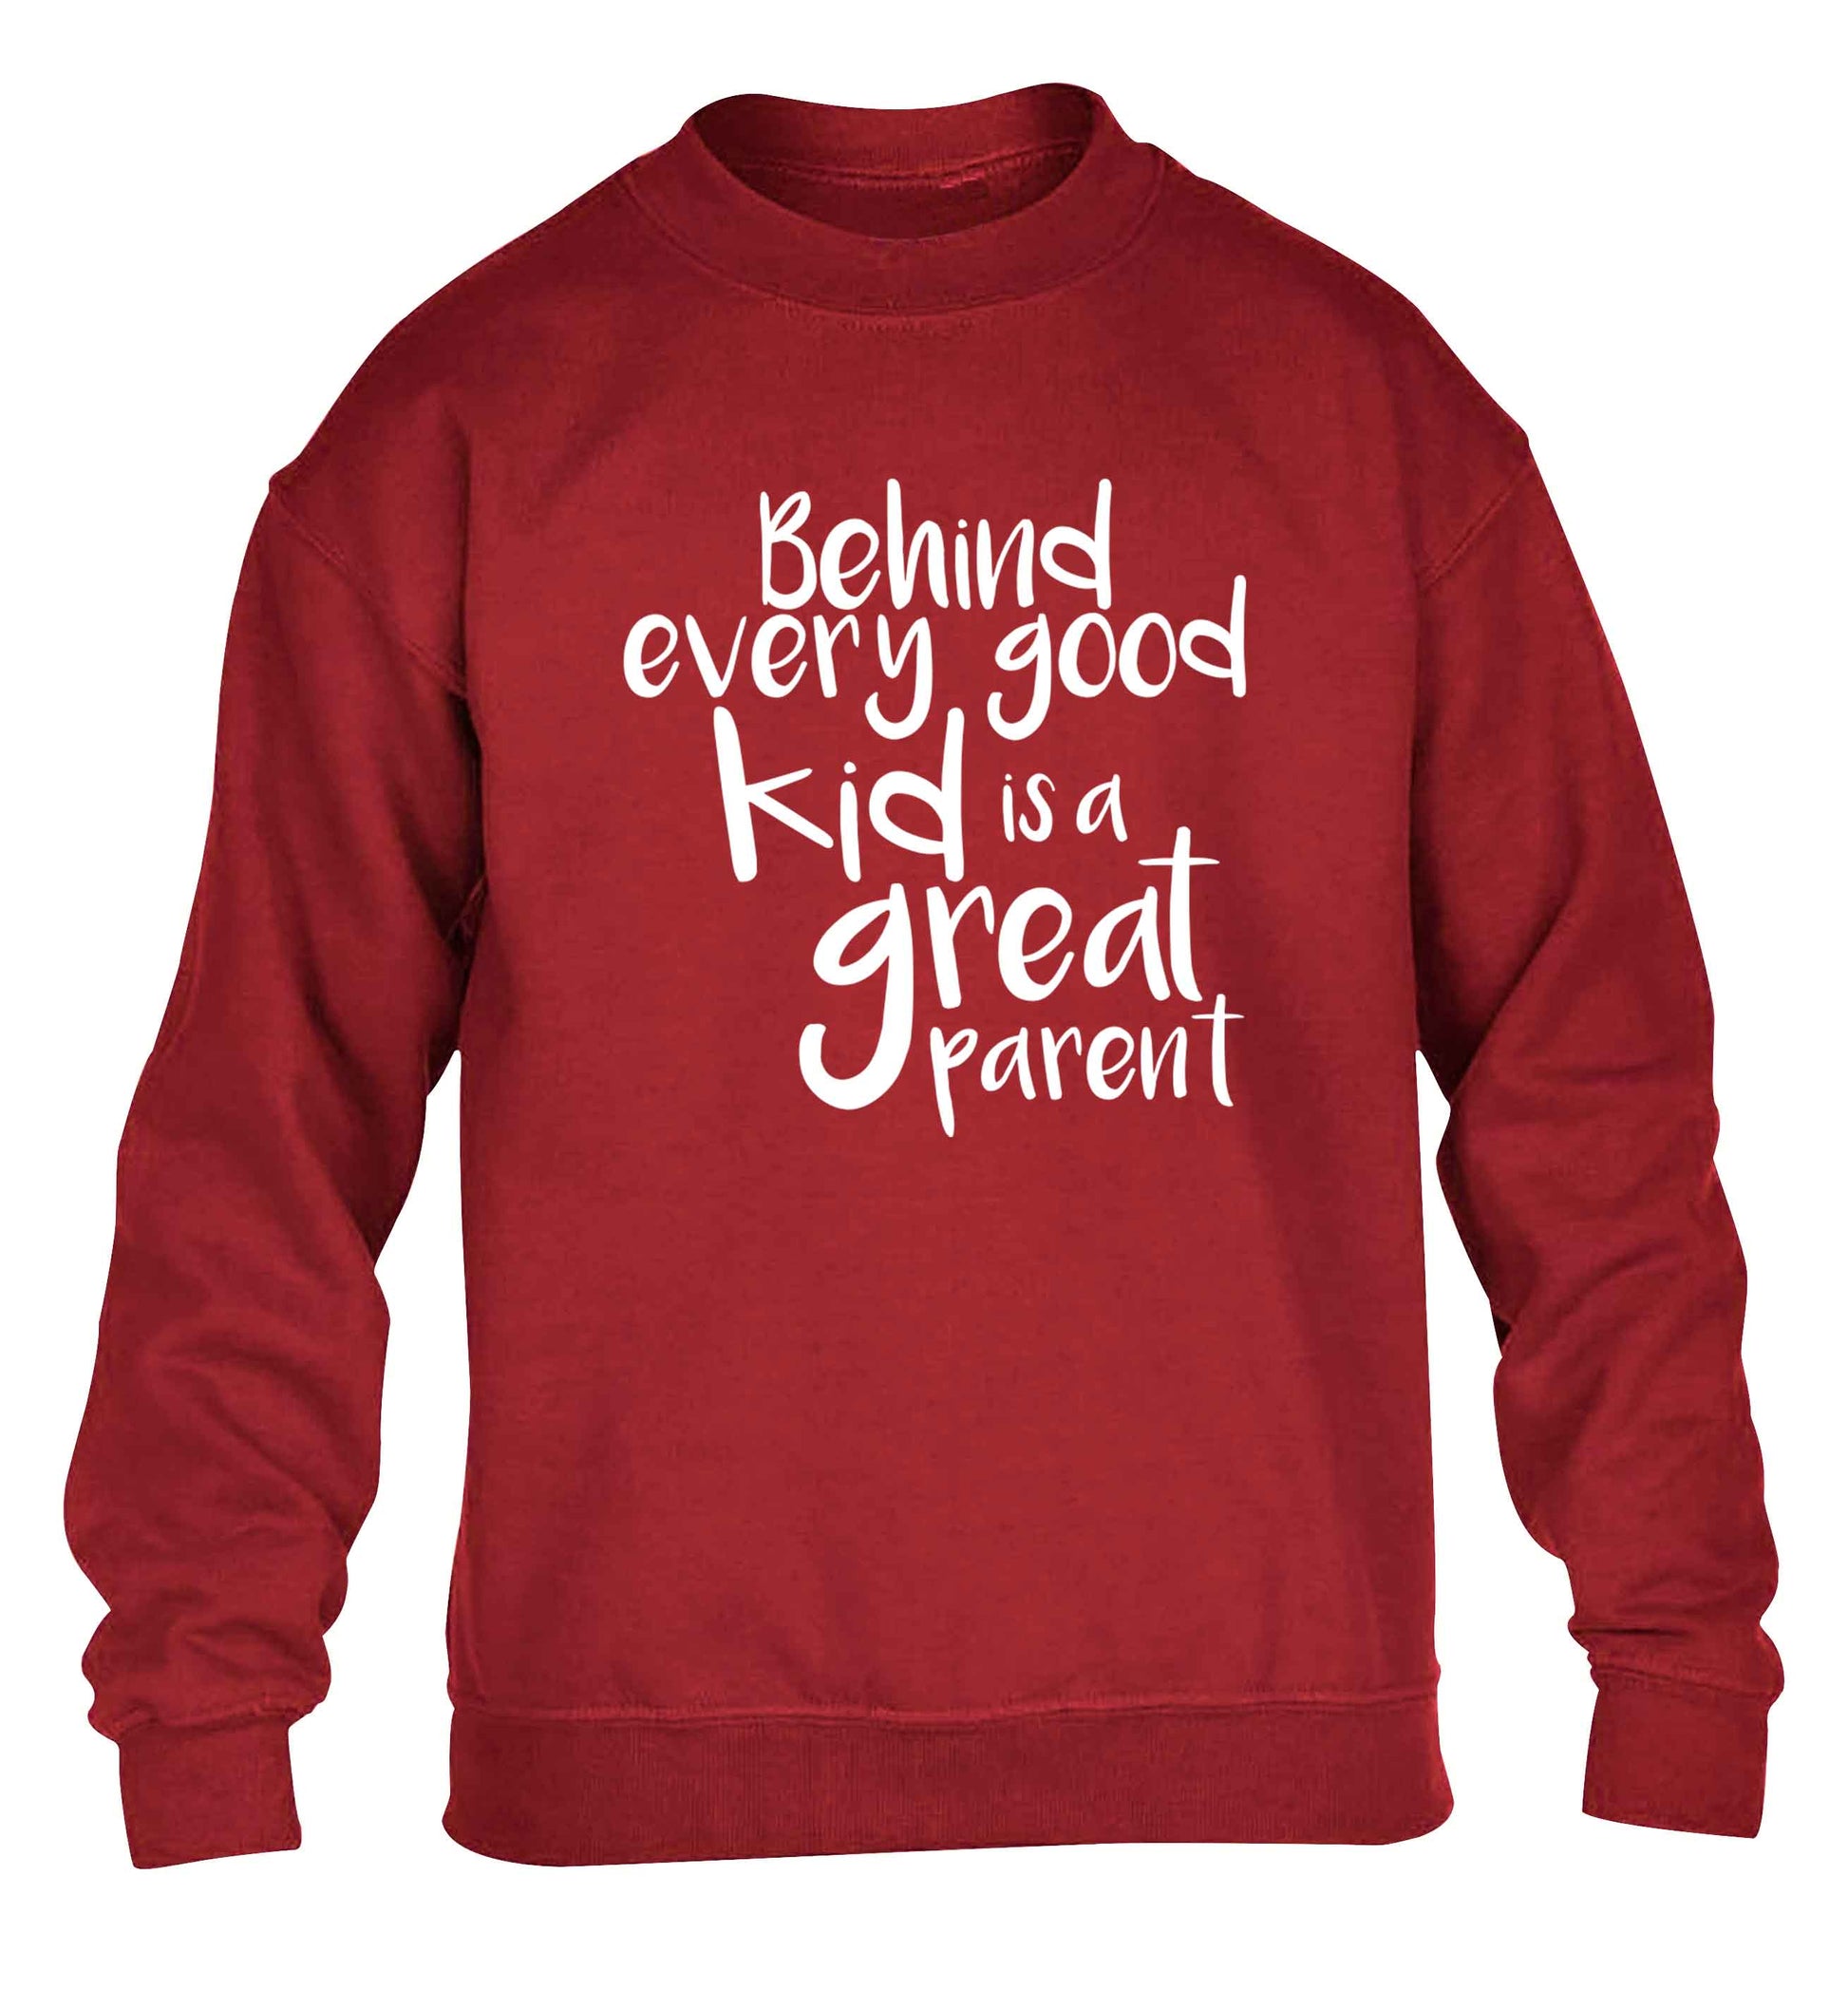 Behind every good kid is a great parent children's grey sweater 12-13 Years